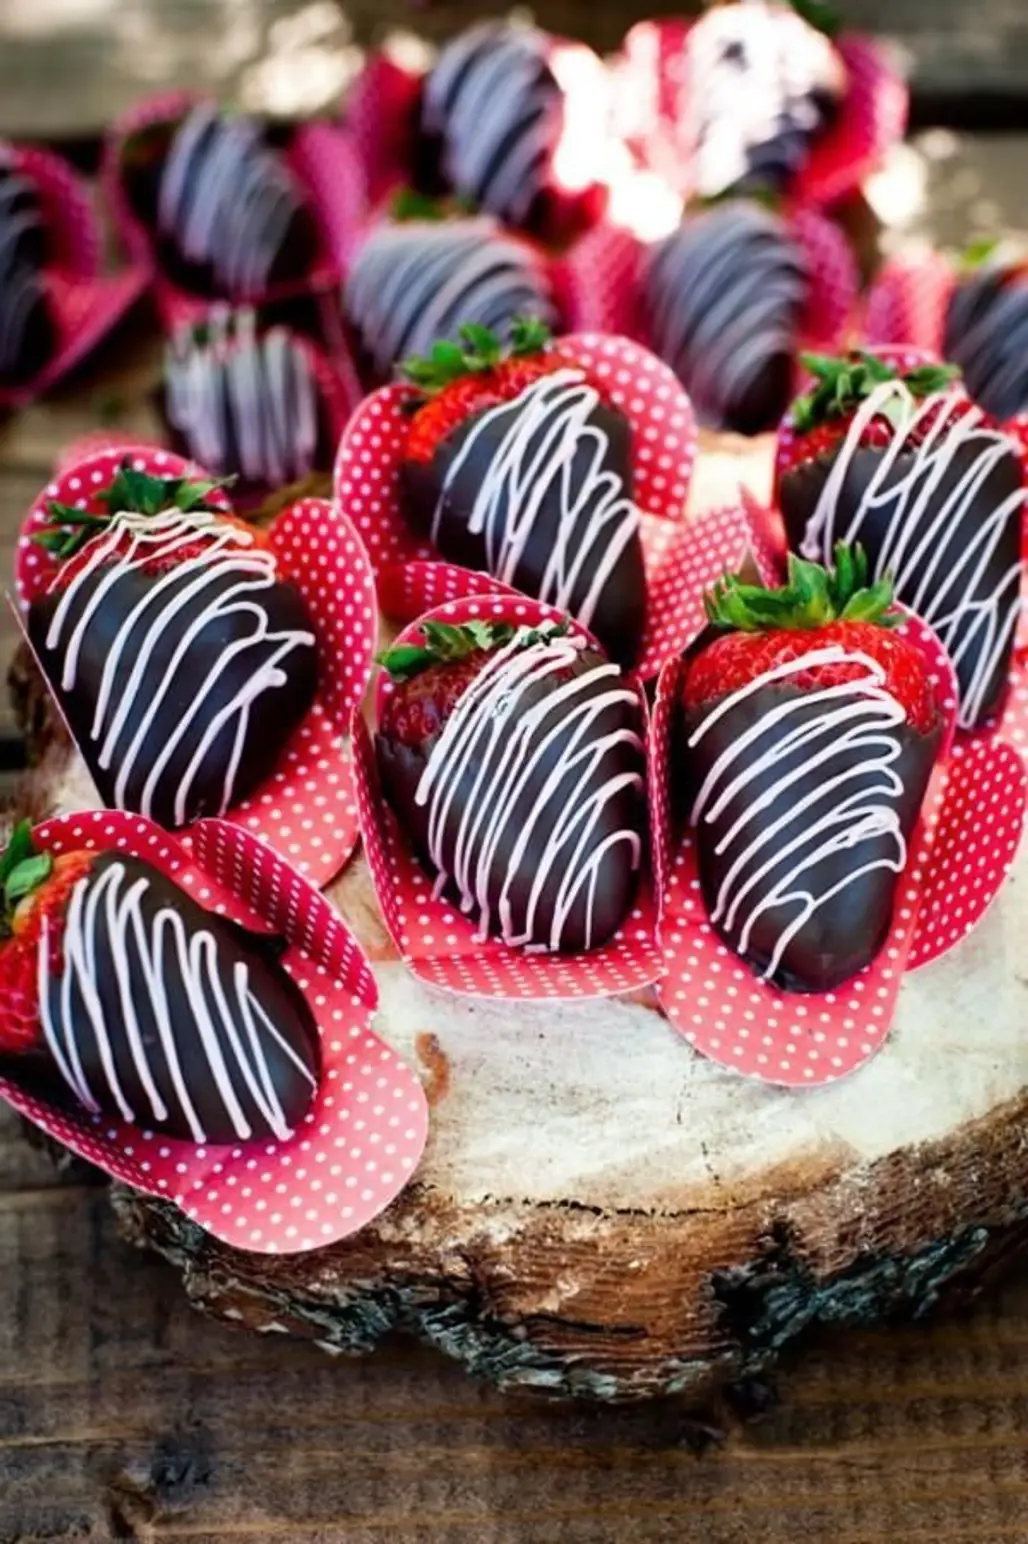 Chocolate Dipped Strawberries (and Other Fruit)